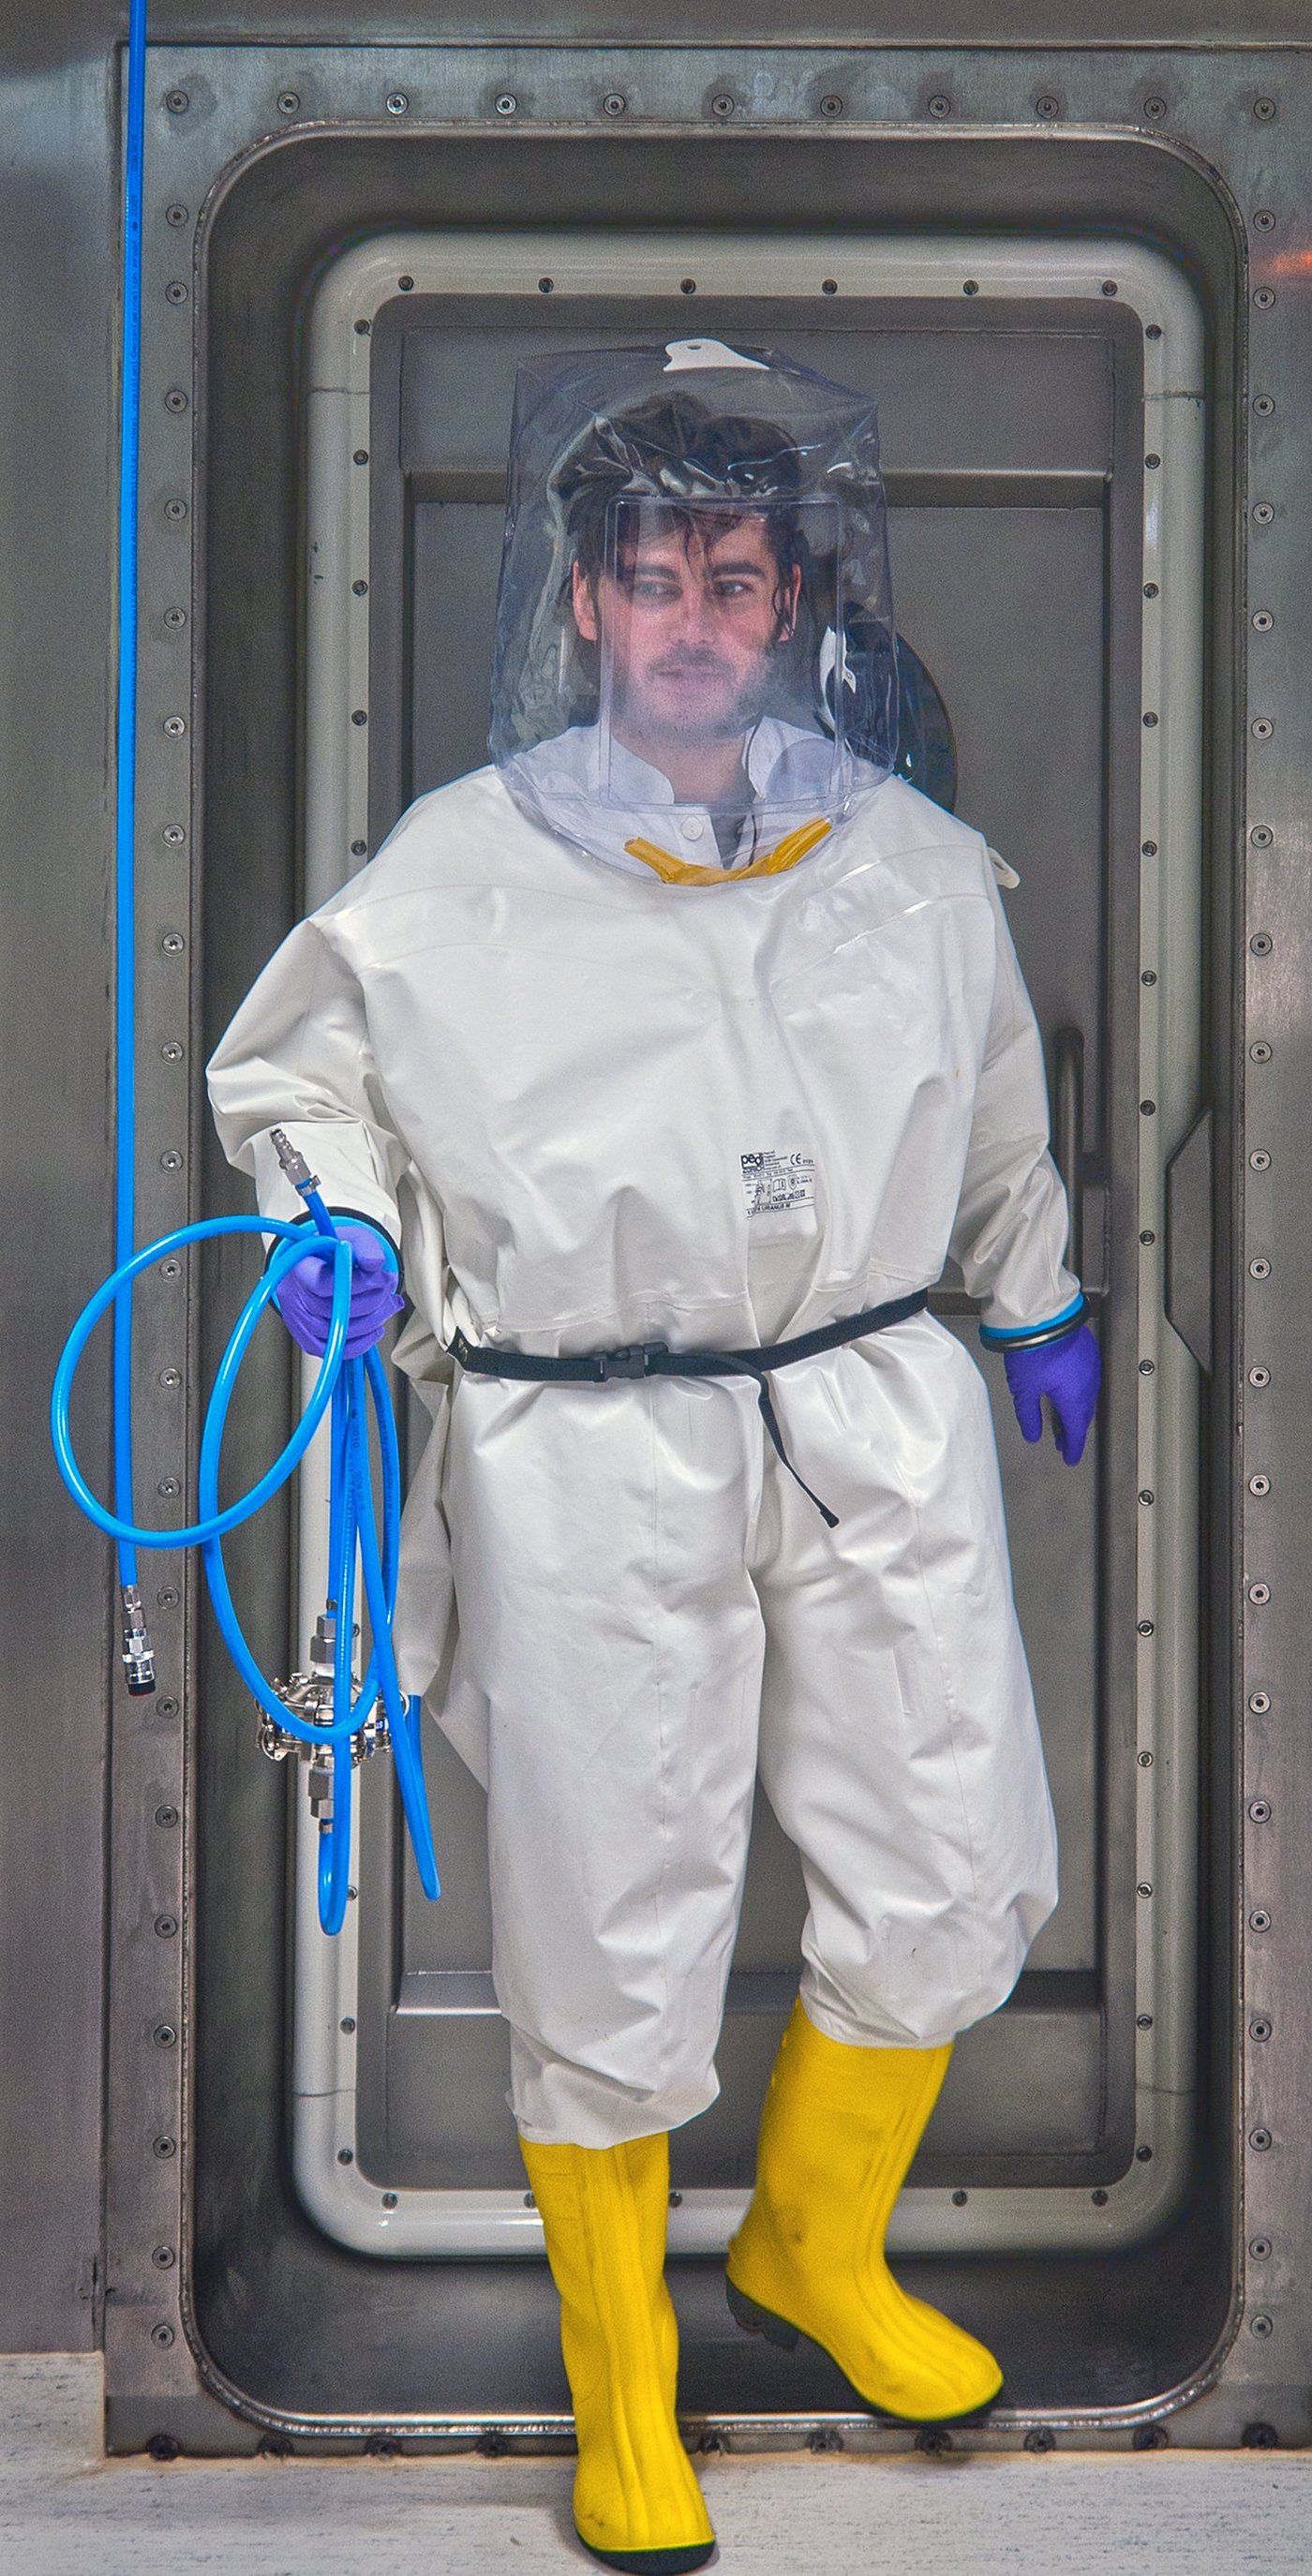 A researcher leaves the airlock in the direction of the laboratory. He is wearing a white full suit and yellow rubber boots. He wears a transparent bonnet over his head. In his hand he carries a blue hose.